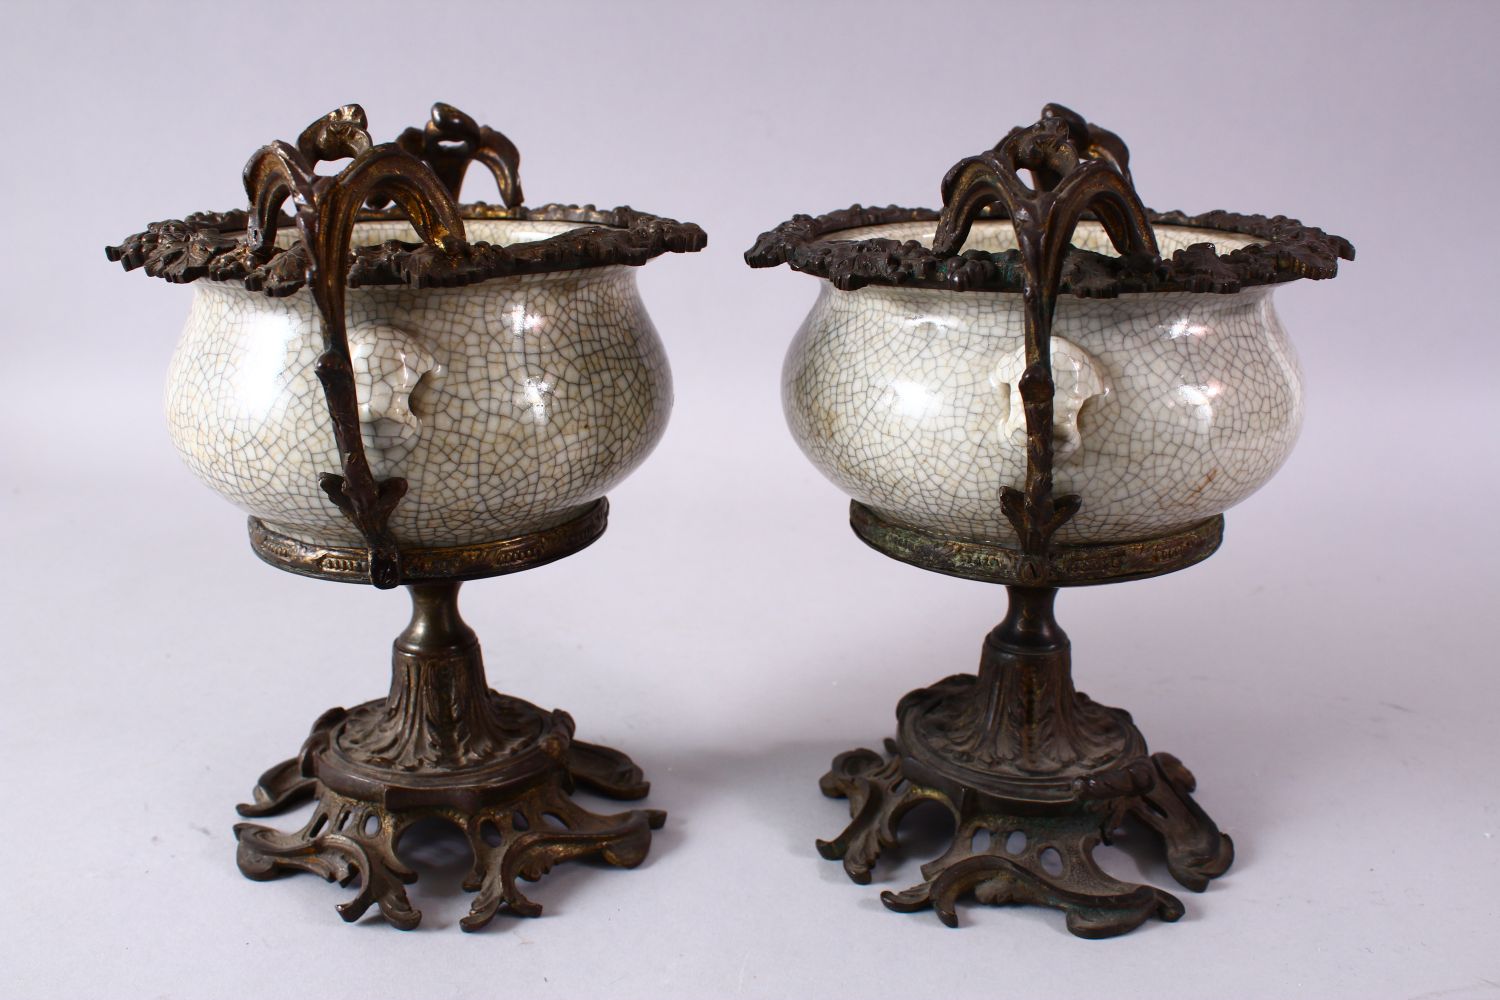 A PAIR OF 19TH/20TH CENTURY CHINESE GUAN WARE POTTERY BOWLS with ormolu mounts, the bowls with - Image 4 of 7